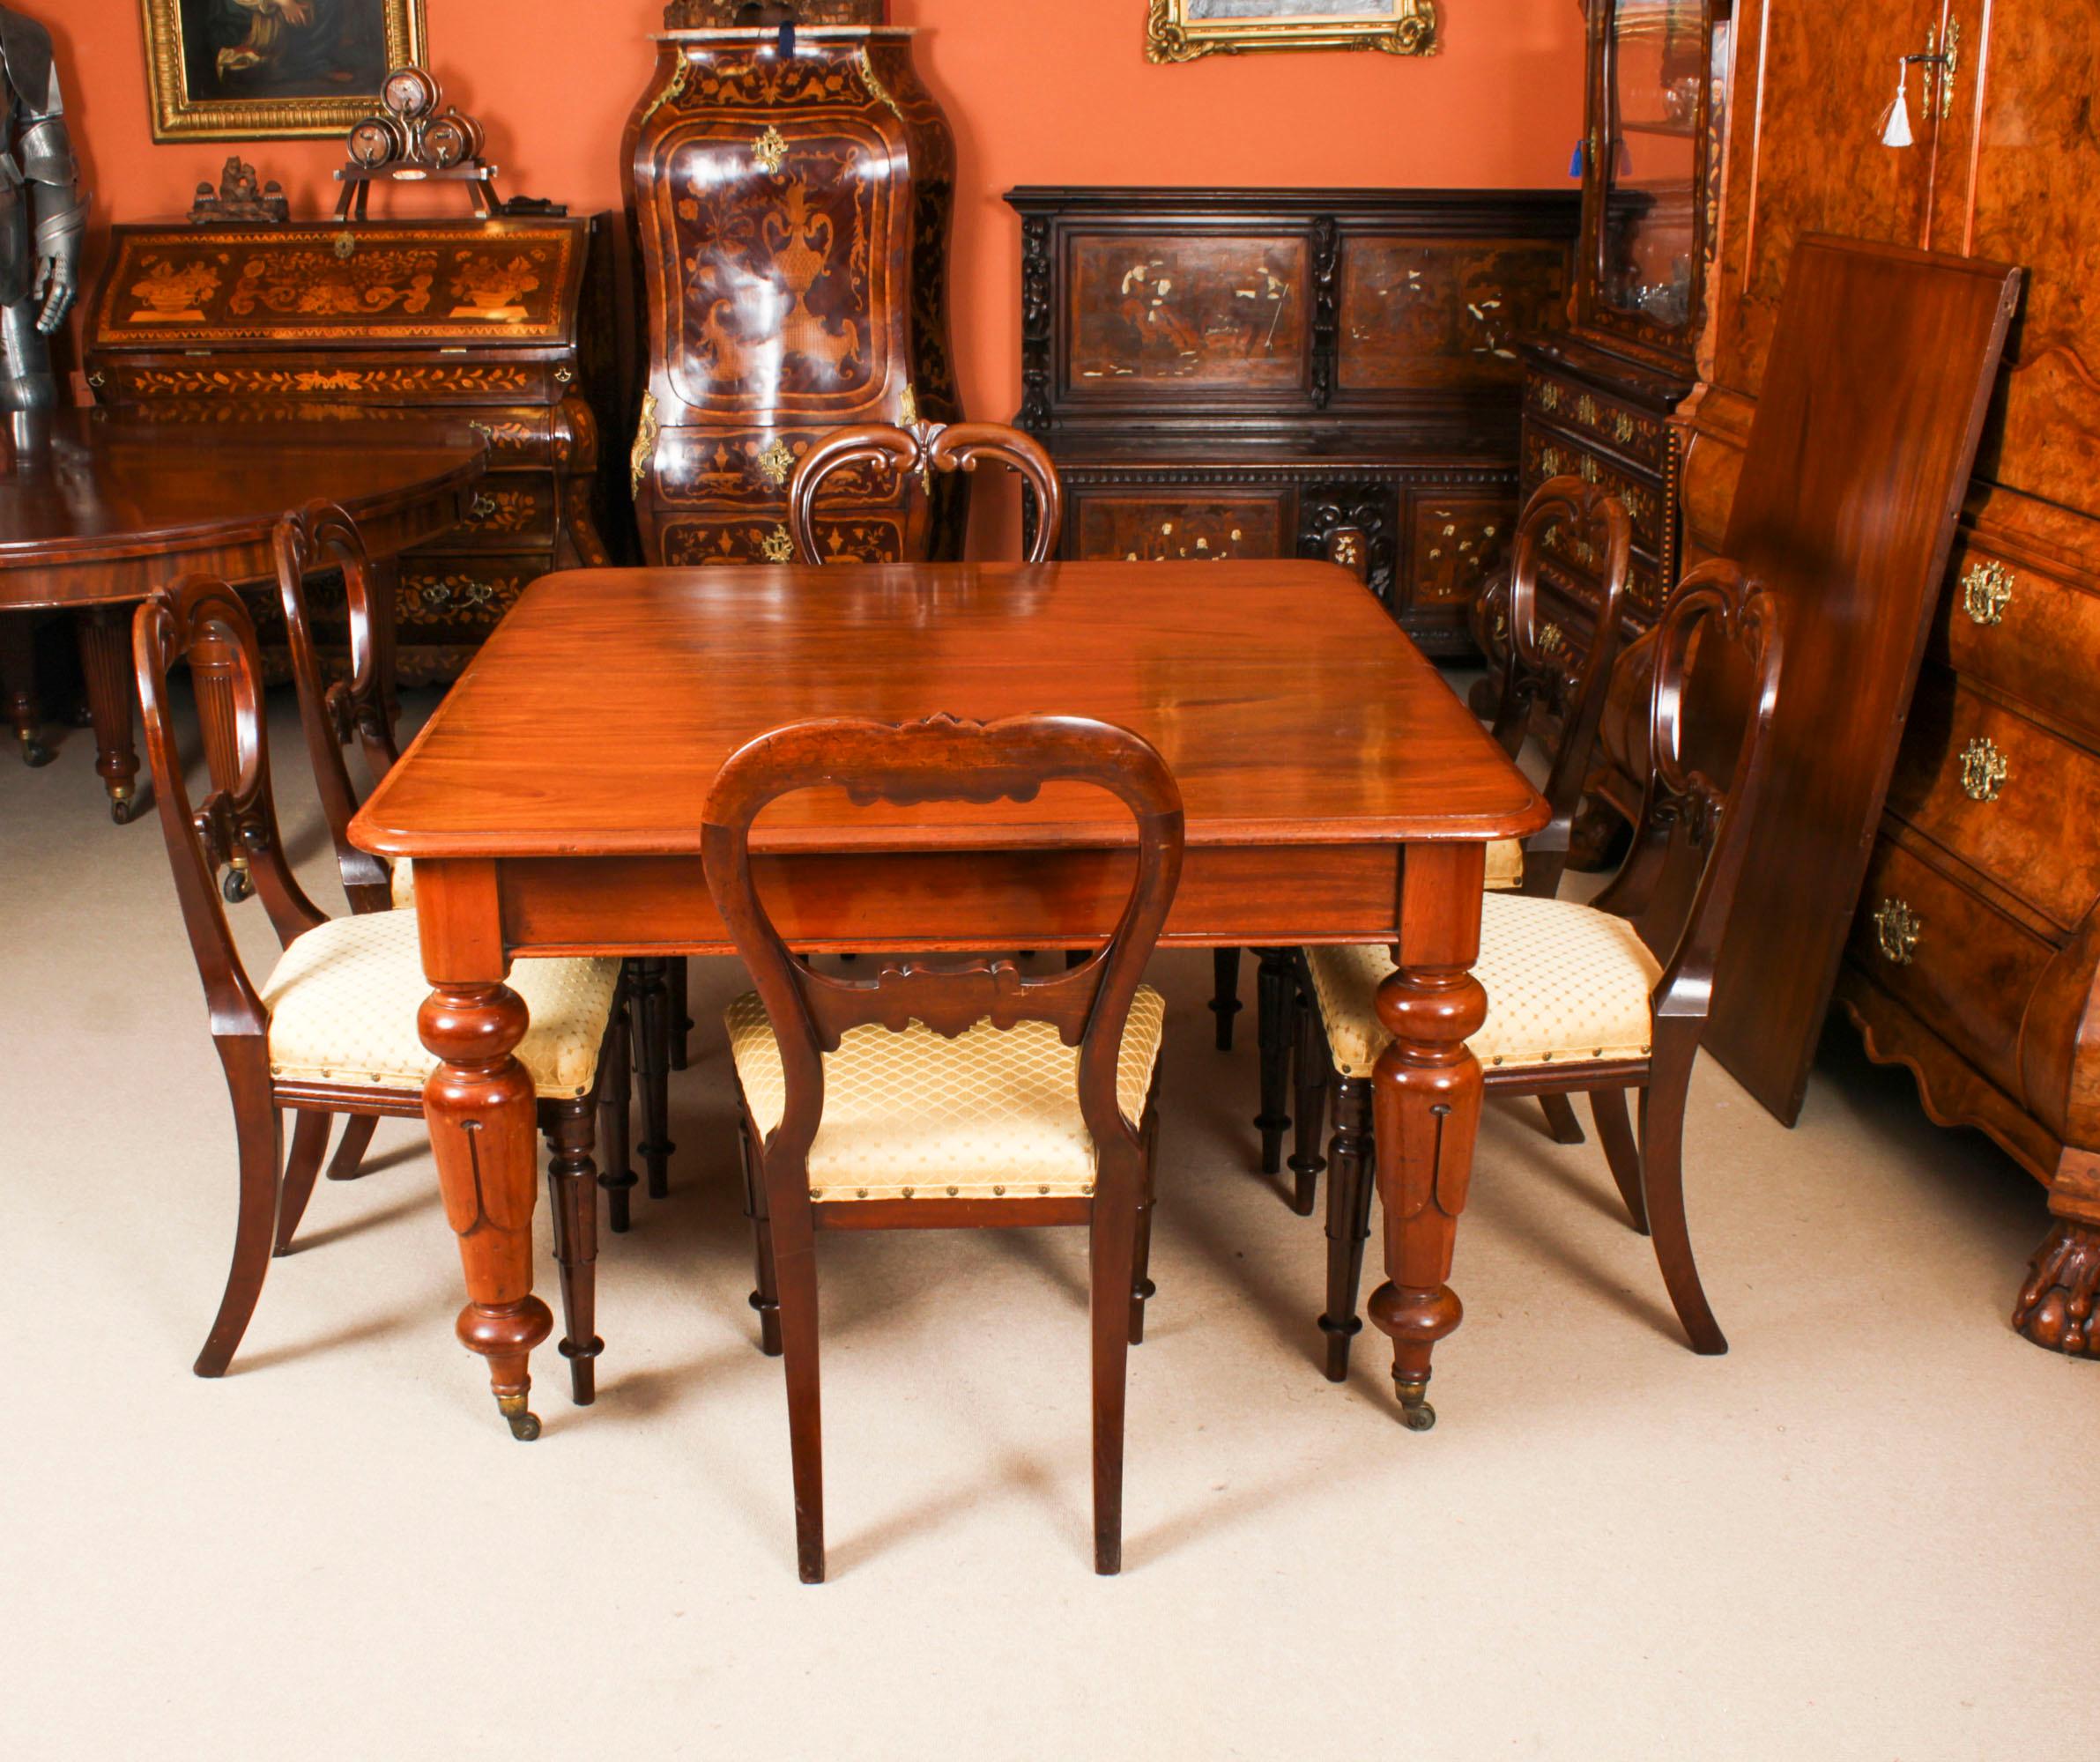 Antique Wiliam IV Mahogany Extending Dining Table & 6 chairs 19th Century 4